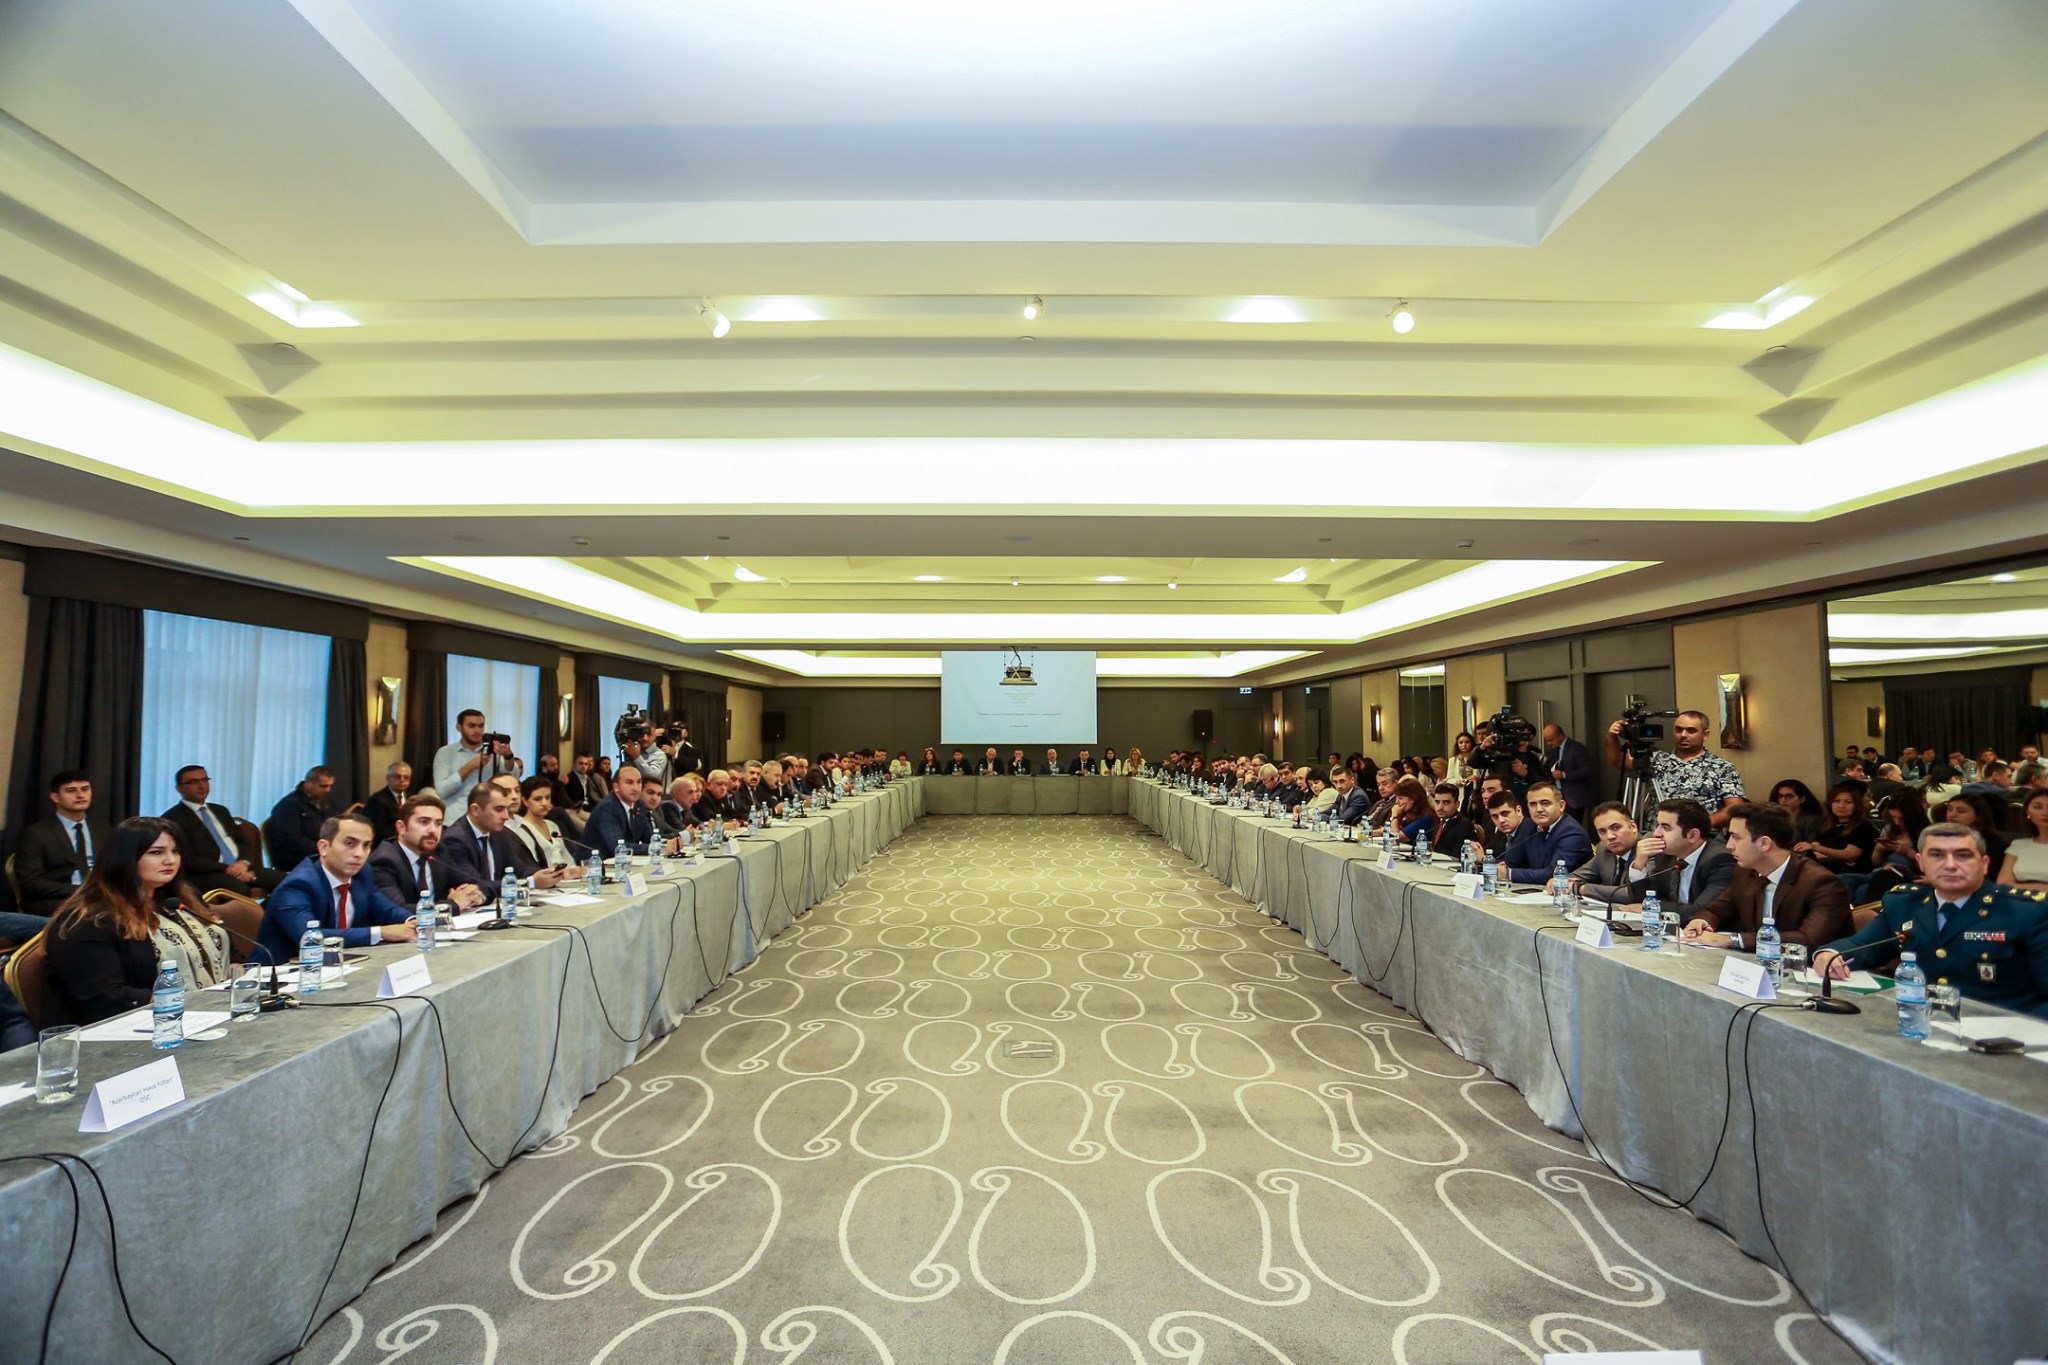 The current situation and prospects of tourism business were discussed 